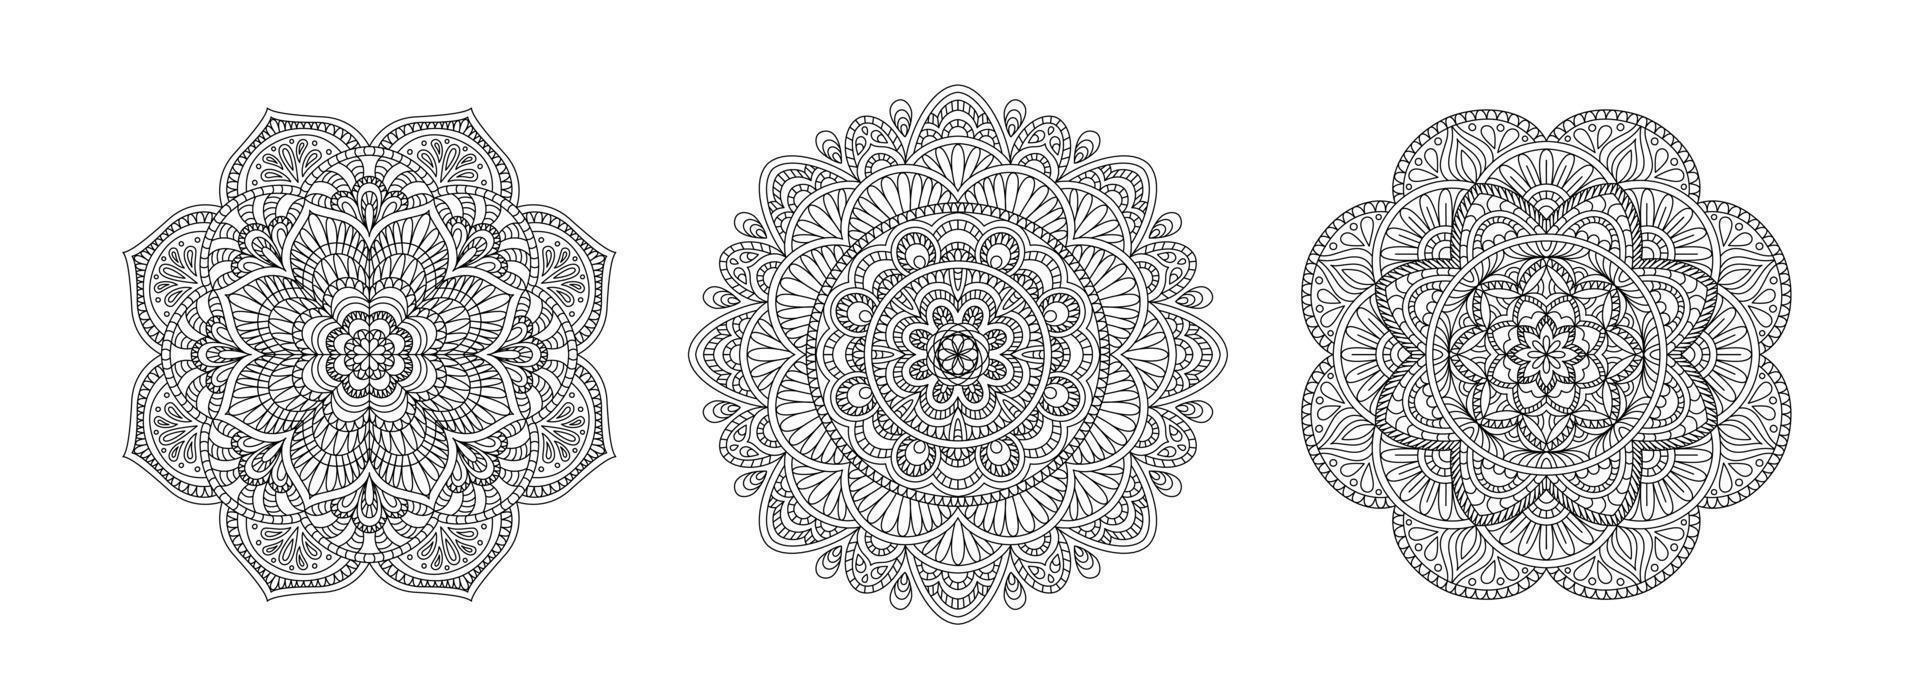 Set round mandalas henna mehndi tattoo, decoration. Outline ornament in ethnic Arabic, Indian, moroccan,spain, turkish, pakistan, chinese, mystic, ottoman oriental style. For print coloring book page vector